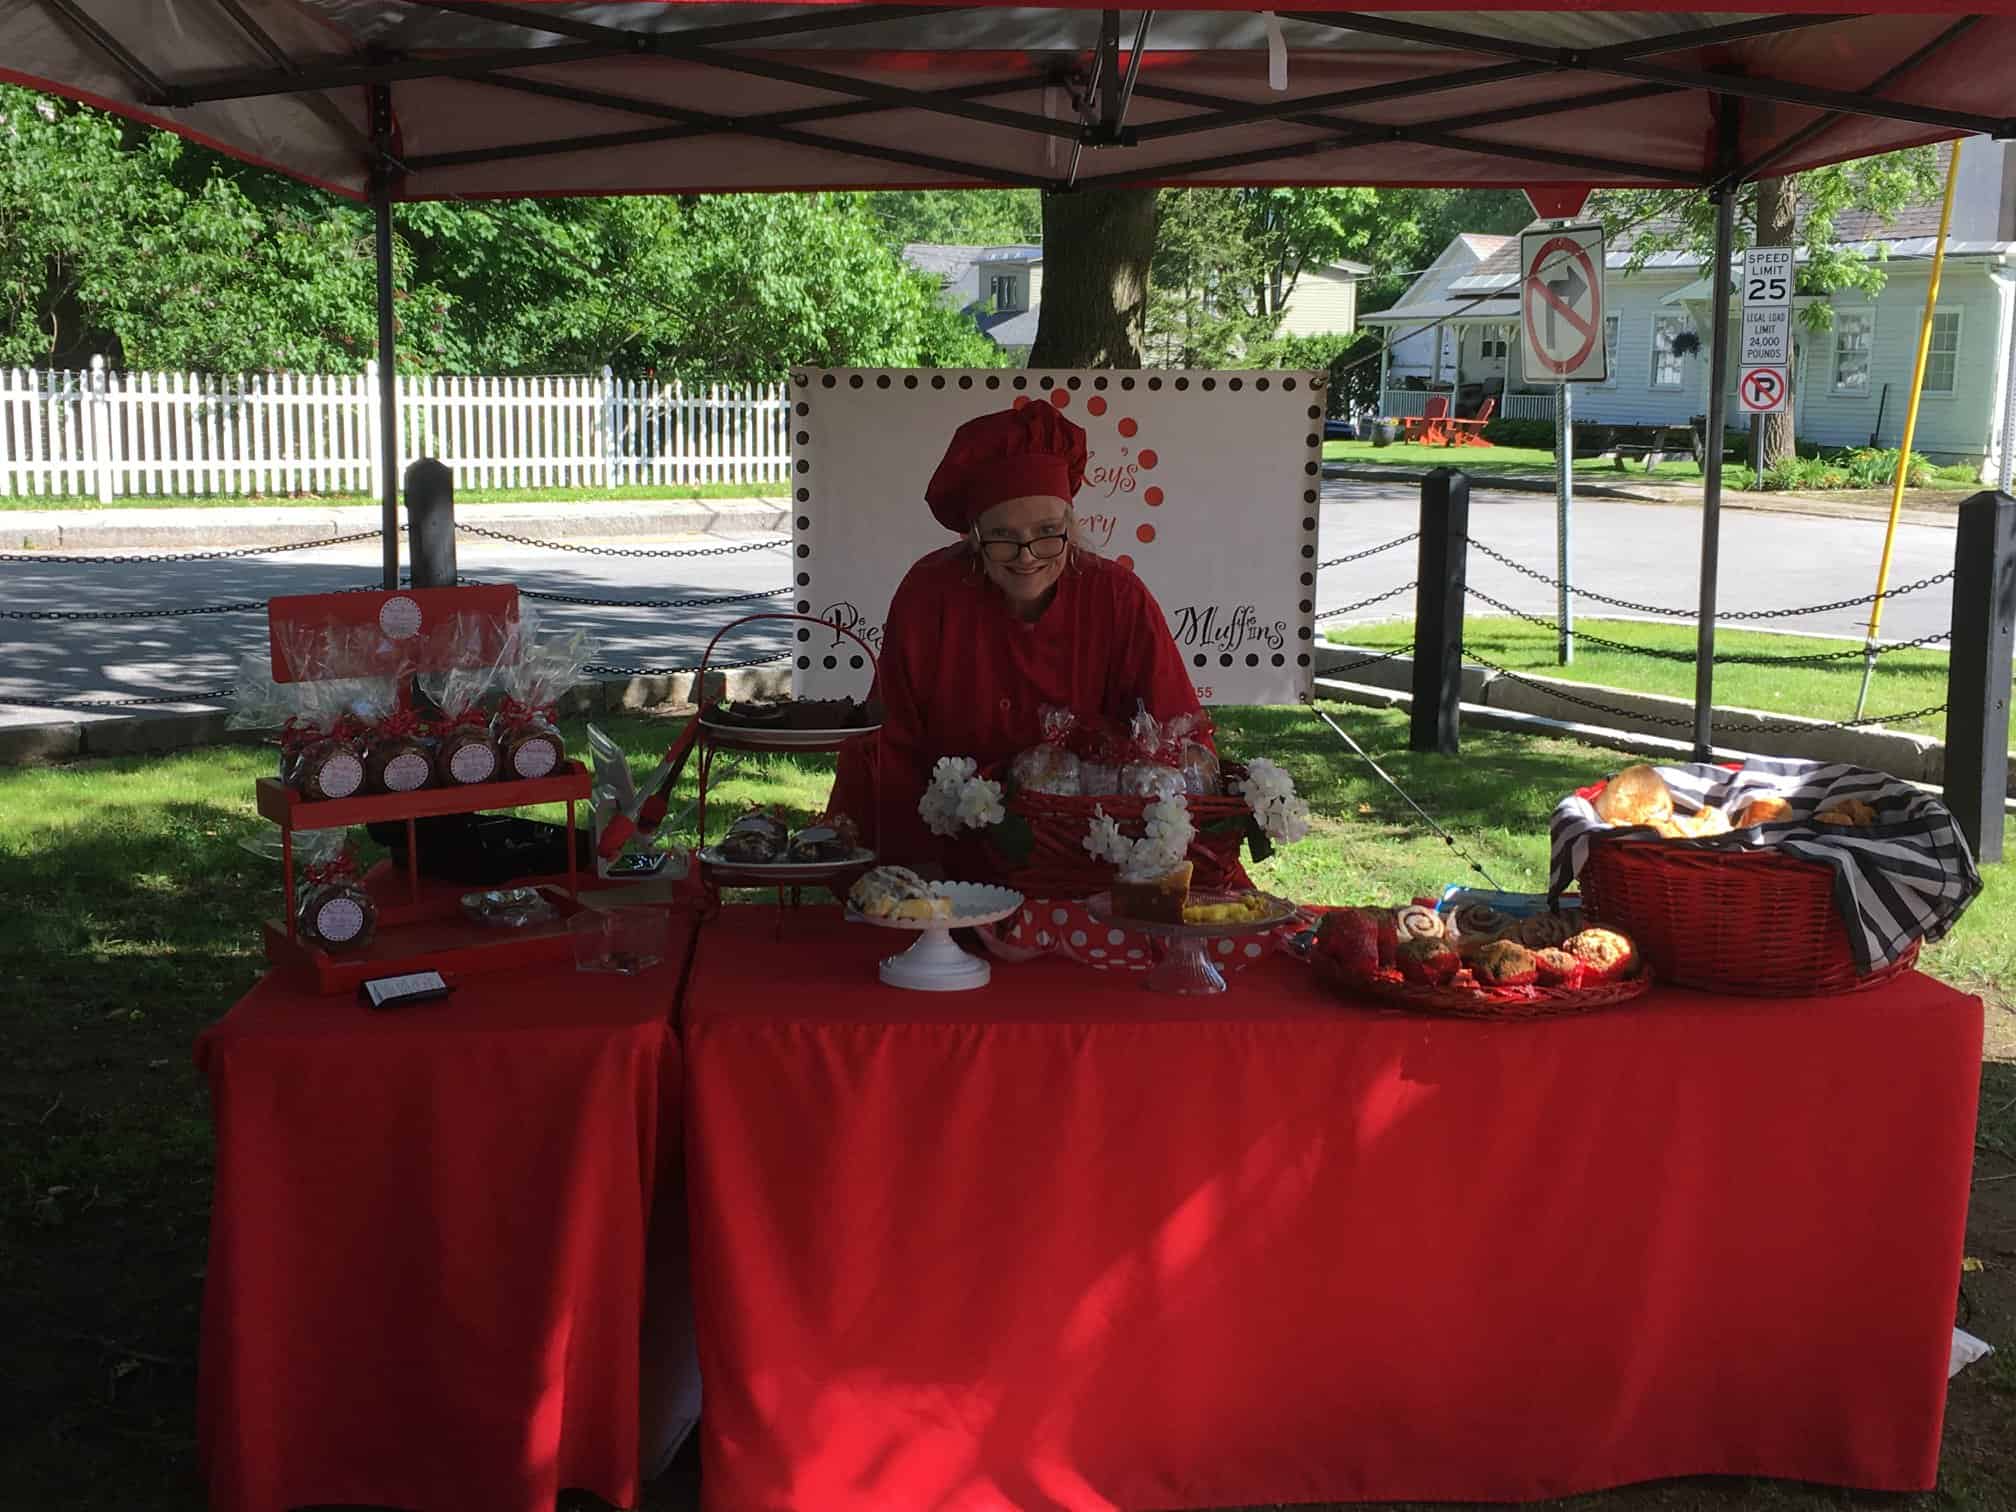 Manchester Farmers Market Bakery Vendor with Red Chef Hat